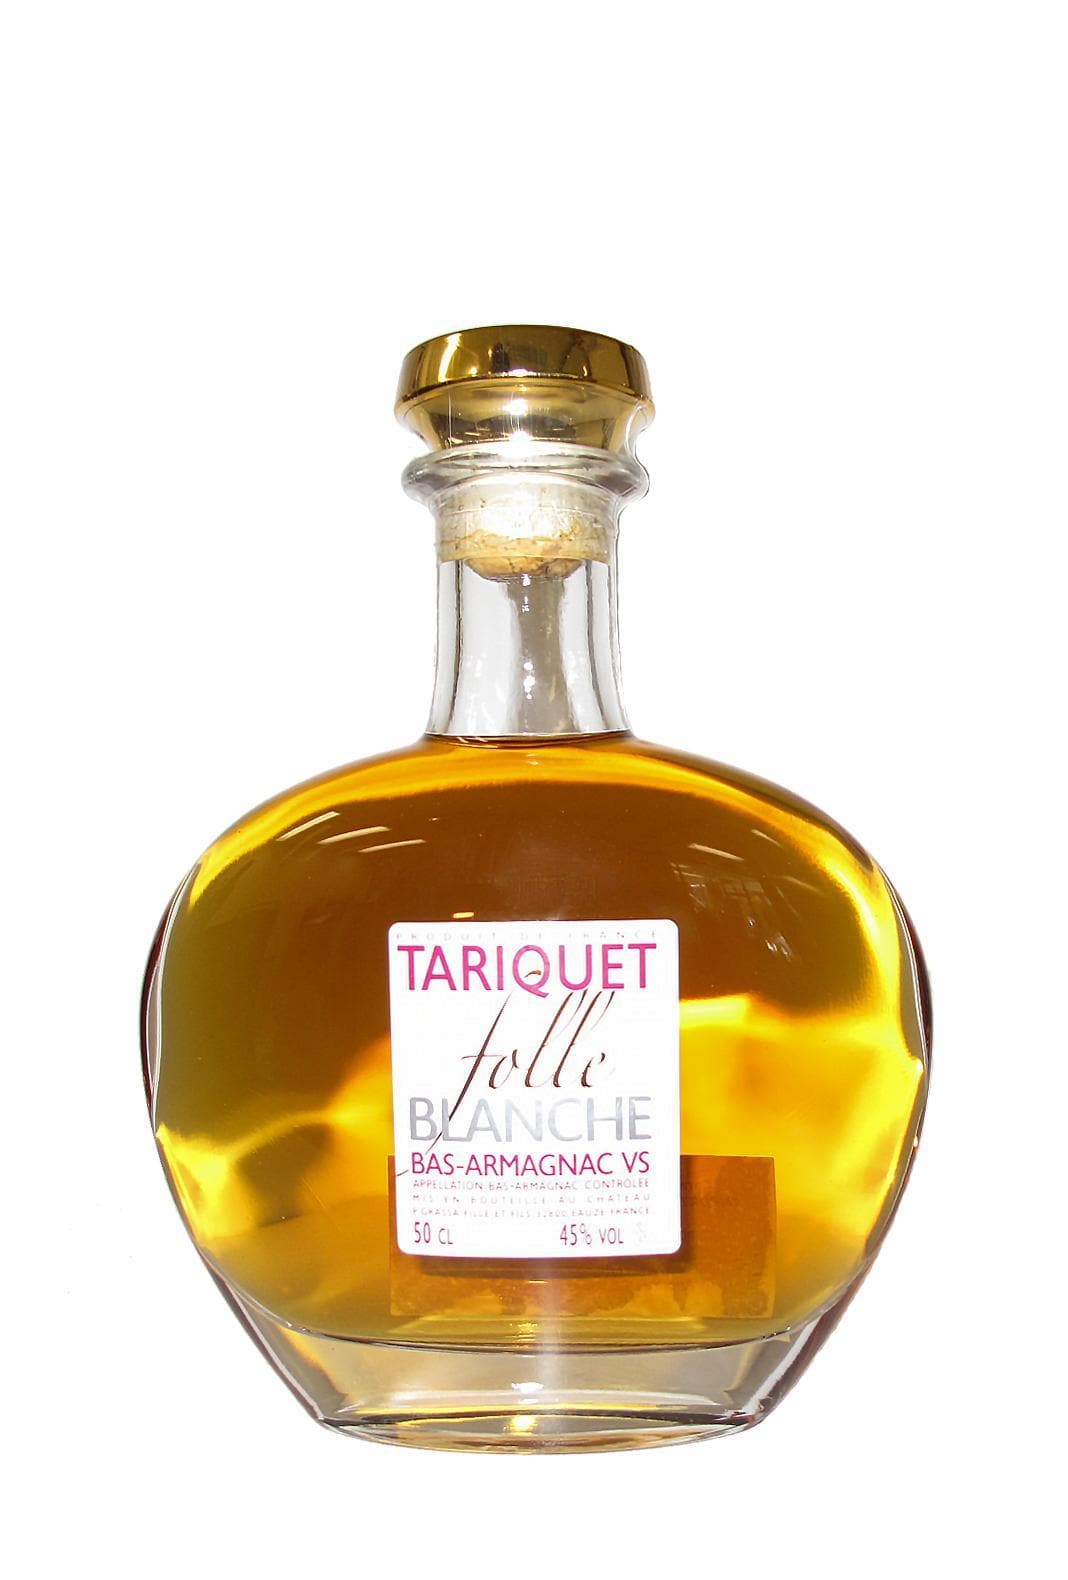 Domaine Tariquet Bas Armagnac 5 years Folle Blanche Carafe 45% 500ml | Brandy | Shop online at Spirits of France